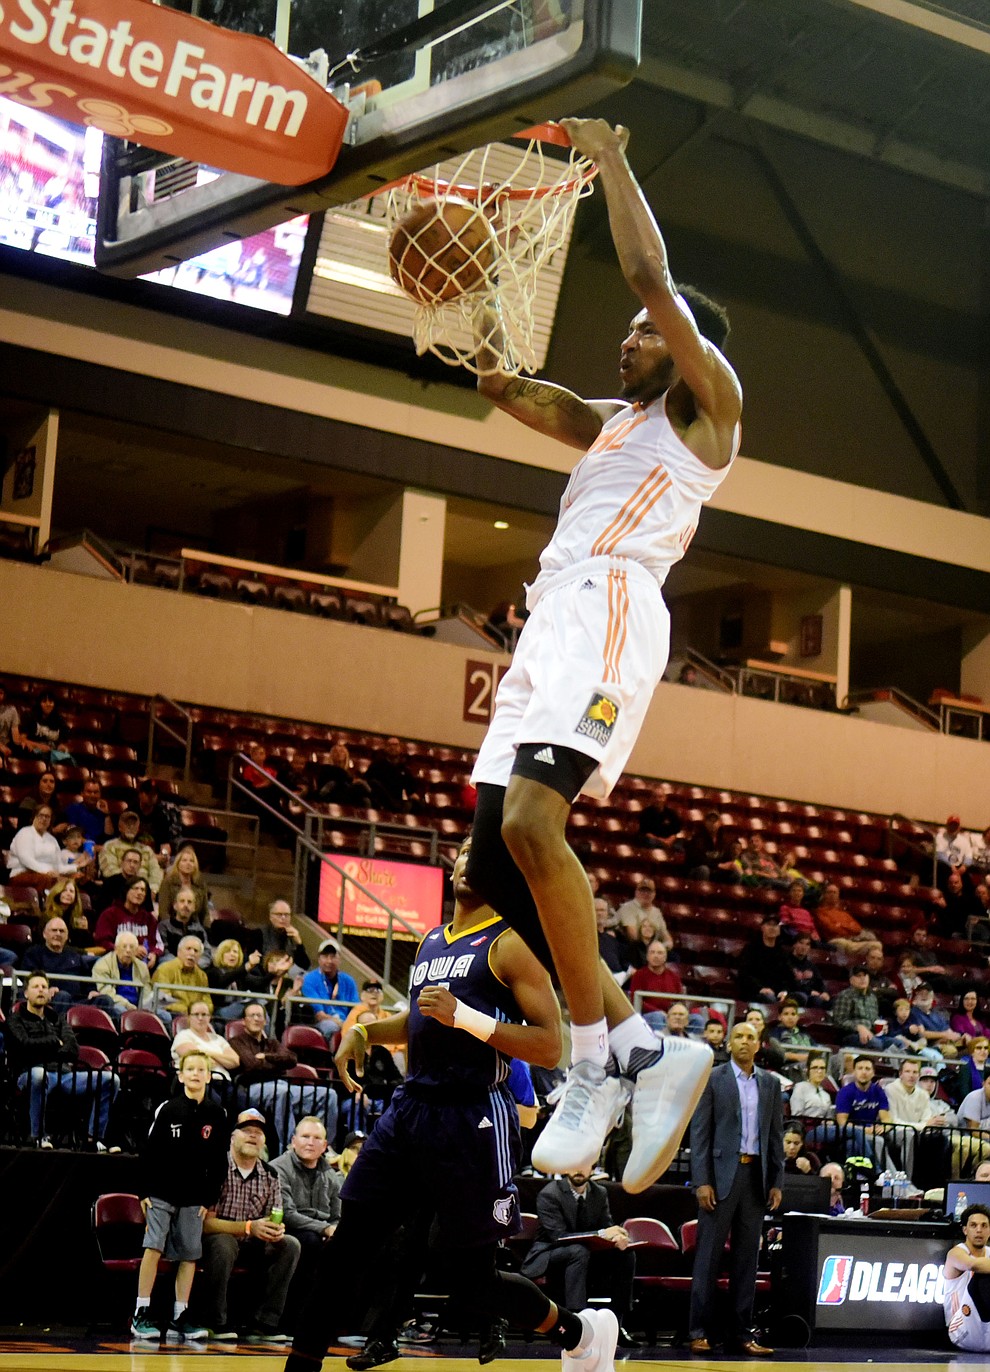 Northern Arizona's Derrick Jones Jr. dunks the ball as the Suns take on the Iowa Energy Saturday, December 10 at the Prescott Valley Event Center.  (Les Stukenberg/The Daily Courier)